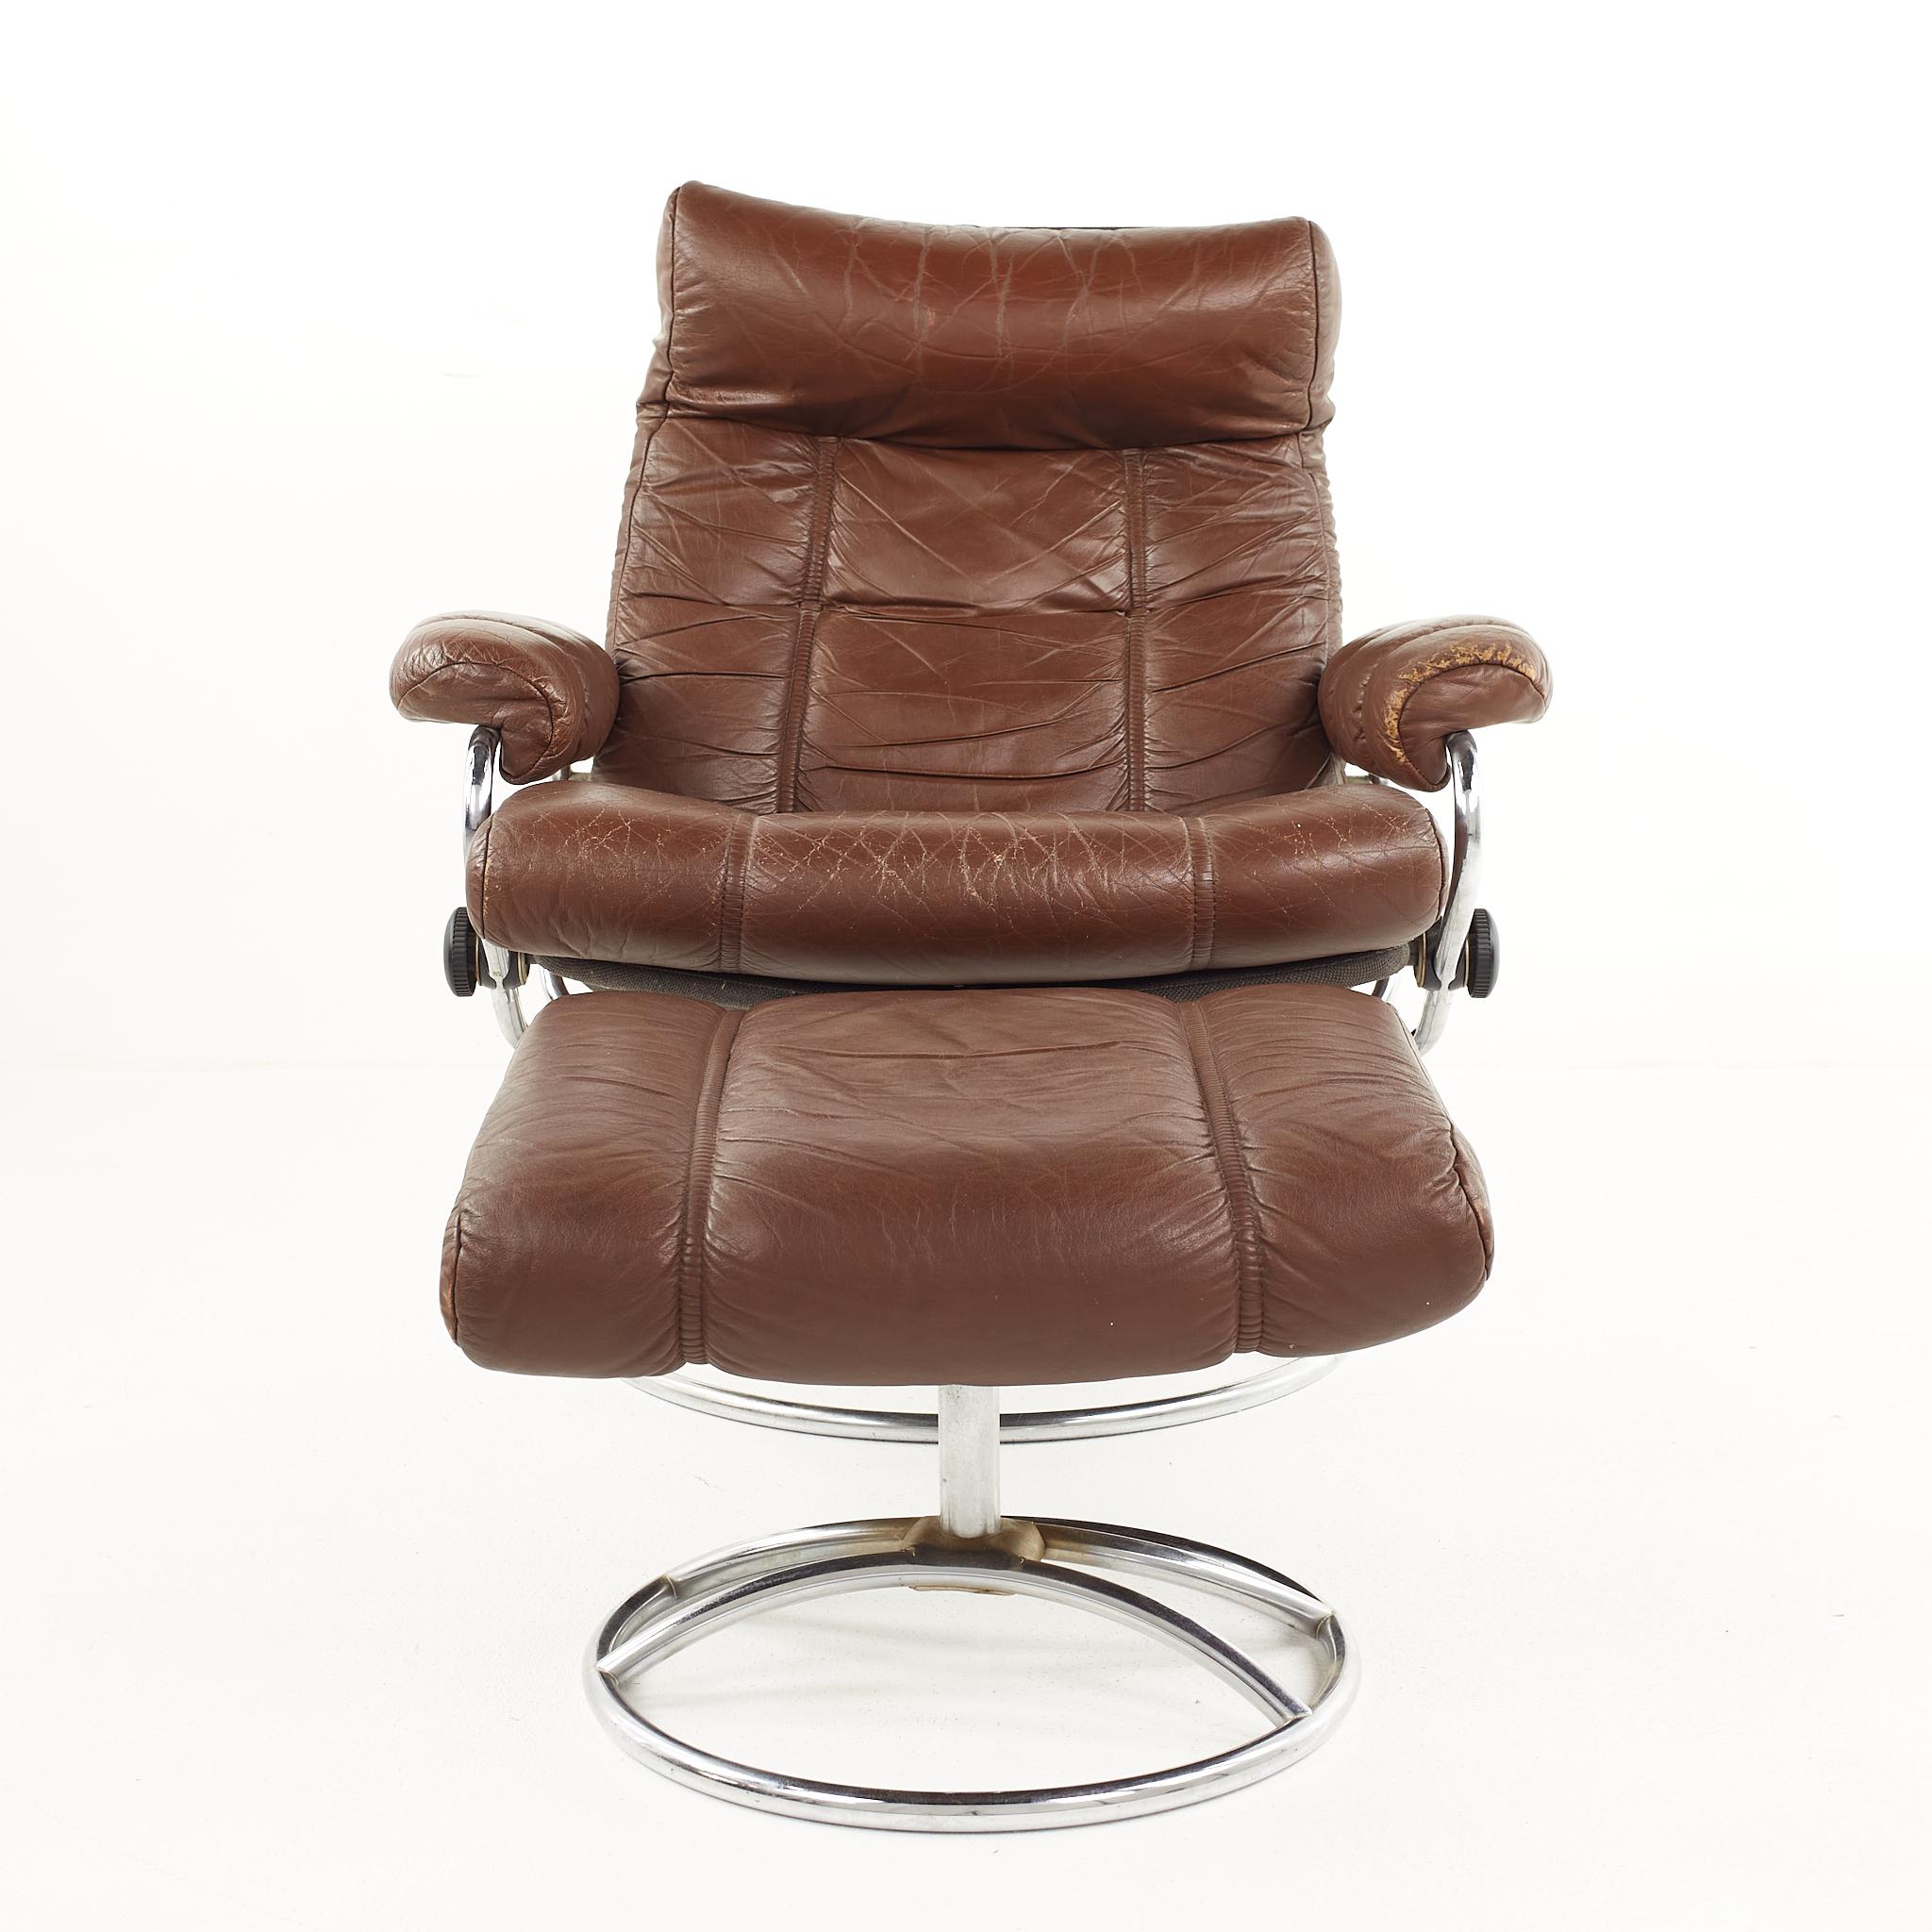 Ekornes mid century chrome and leather stressless lounge chair and ottoman.

The chair measures: 33.5 wide x 34 deep x 34 inches high, with a seat height of 18 inches and arm height of 22 inches

The ottoman measures: 21.5 wide x 18 deep x 14